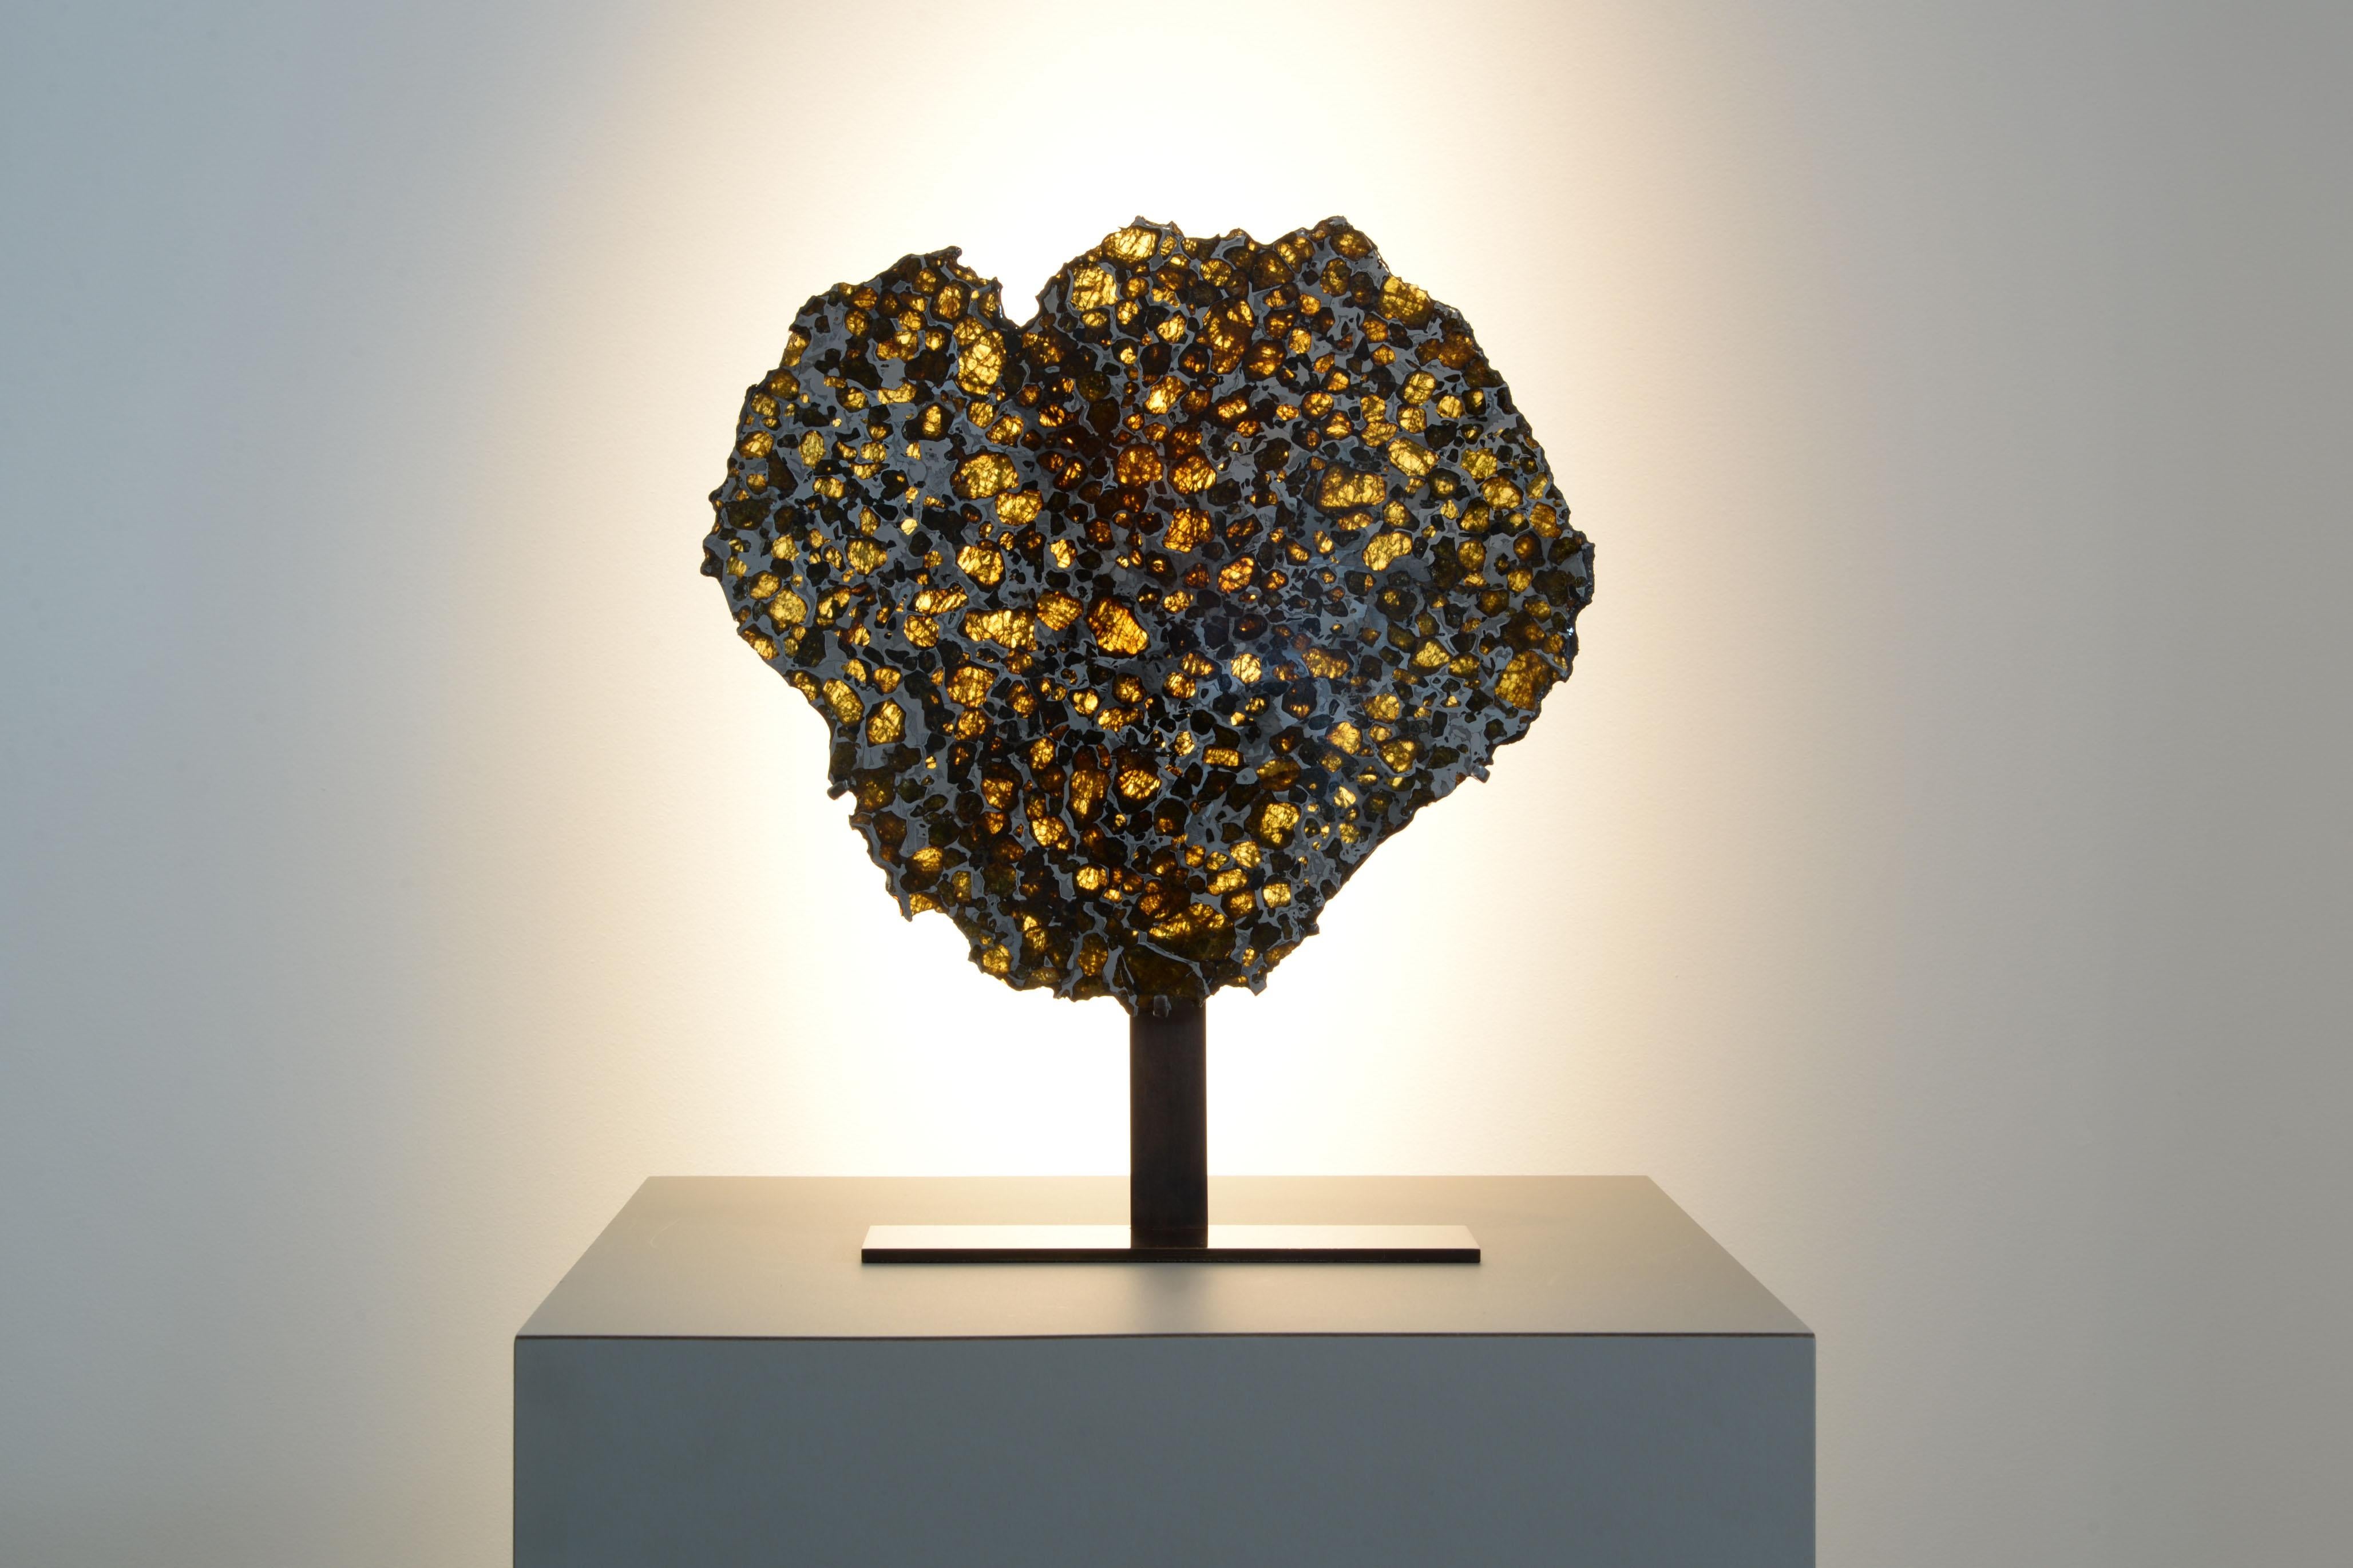 This complete cross-section from the pallasite meteorite Imilac has been prepared to reveal shimmering olivine and peridot gems embedded in iron-nickel metallic crystals, forming a magnificent honeycomb pattern characteristic of pallasites. Imilac